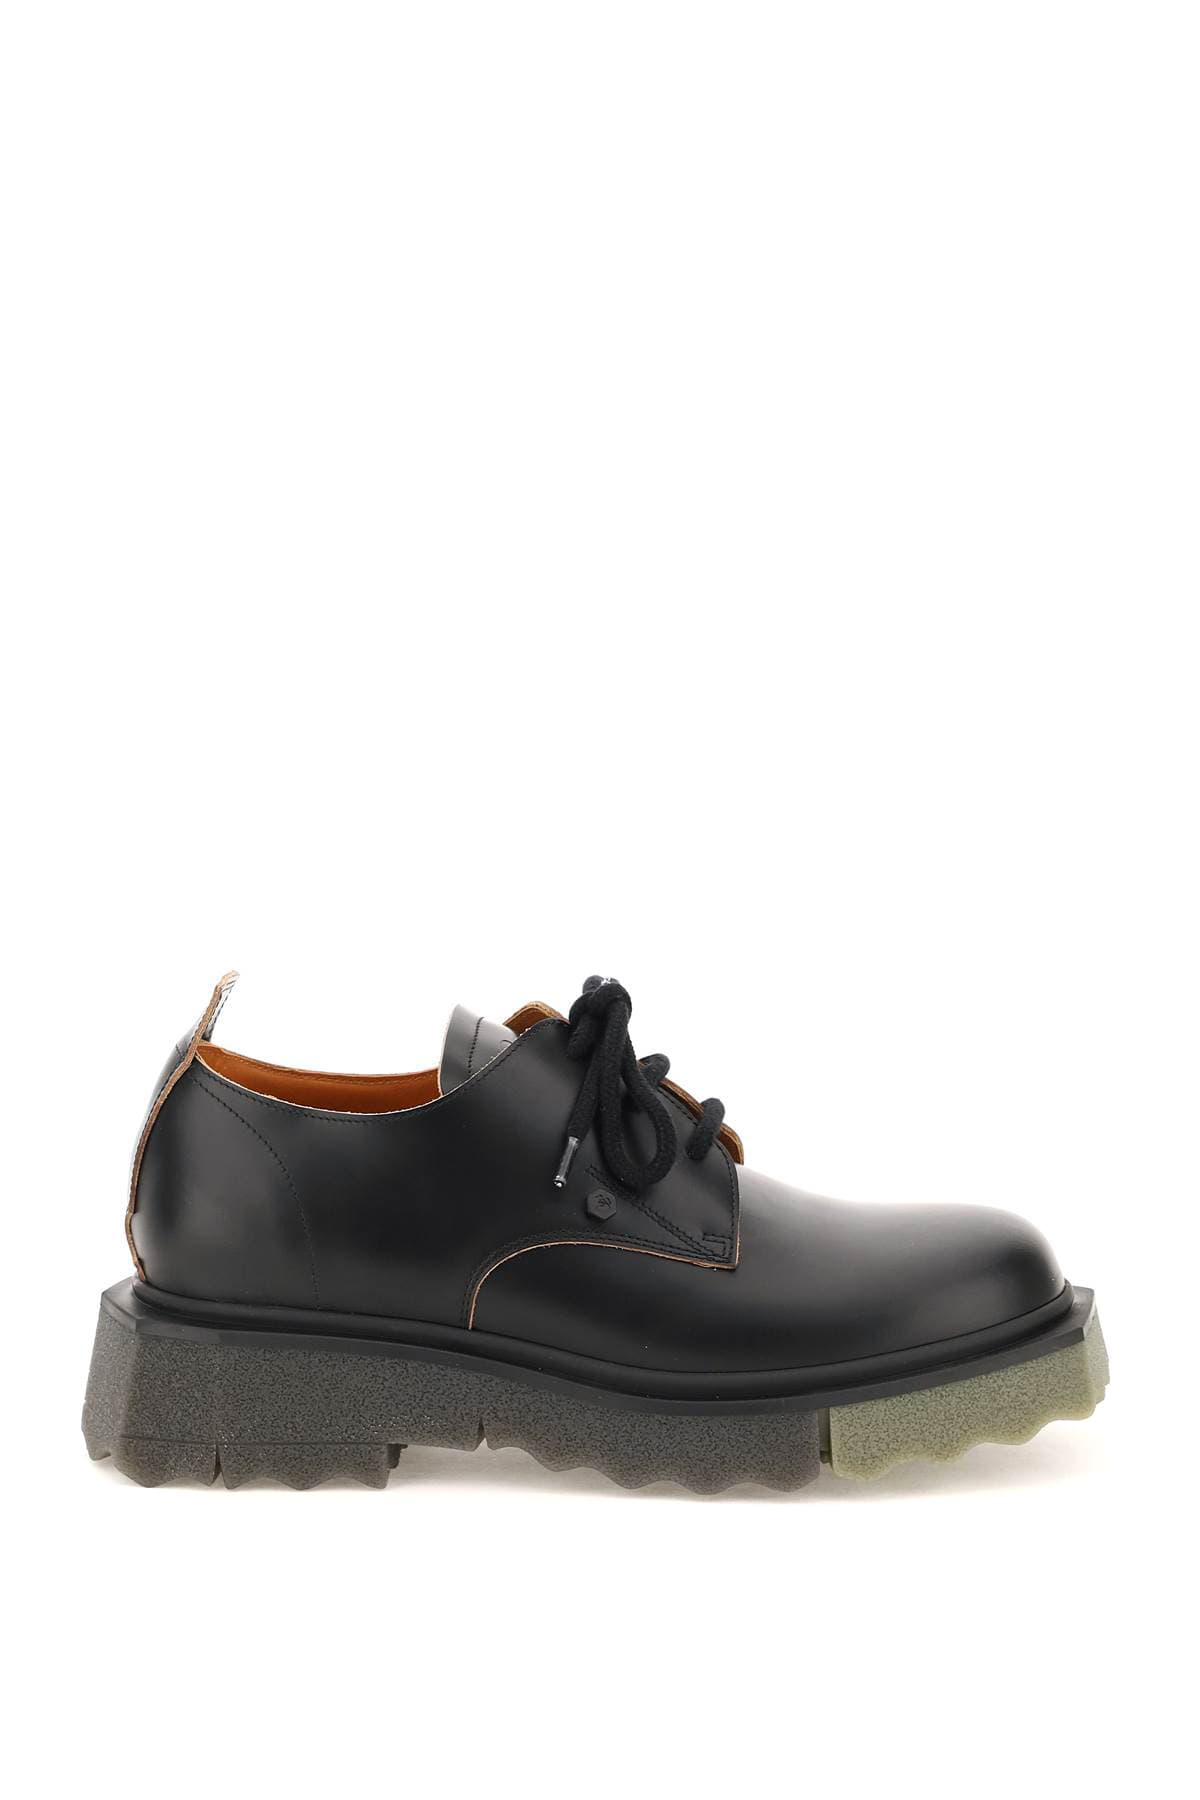 OFF-WHITE SPONGE SOLE LEATHER DERBY SHOES